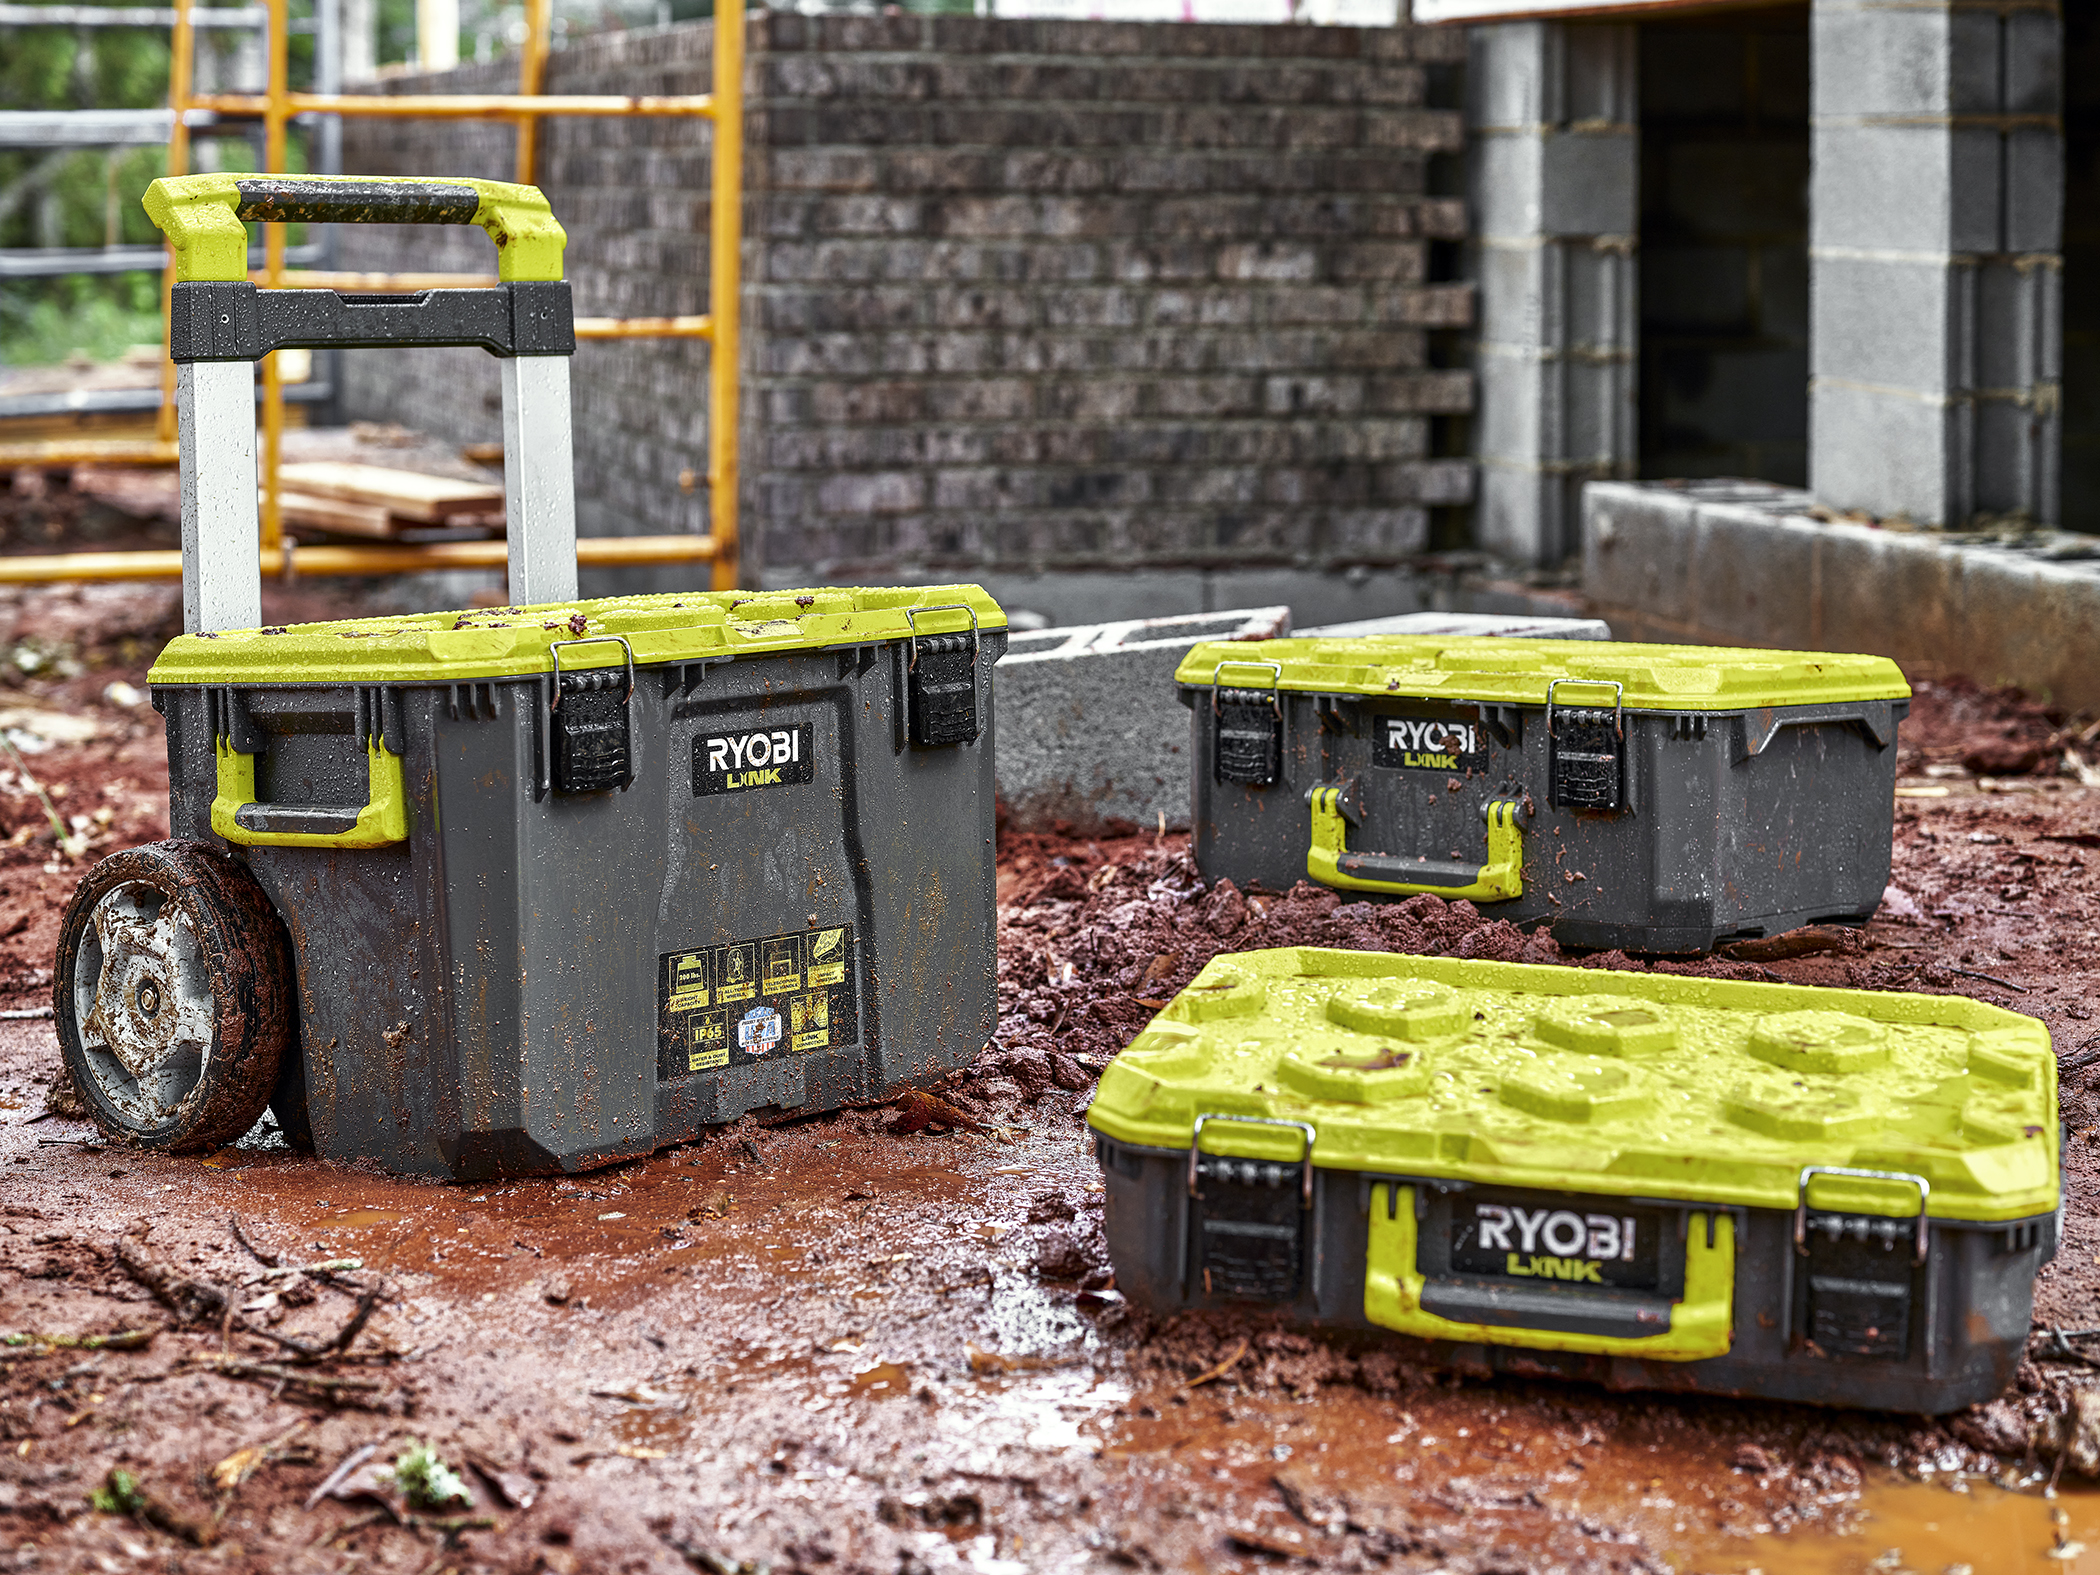 New RYOBI™ LINK™ Modular Storage System: Create Custom Organization  Solutions in the Home or on the Jobsite